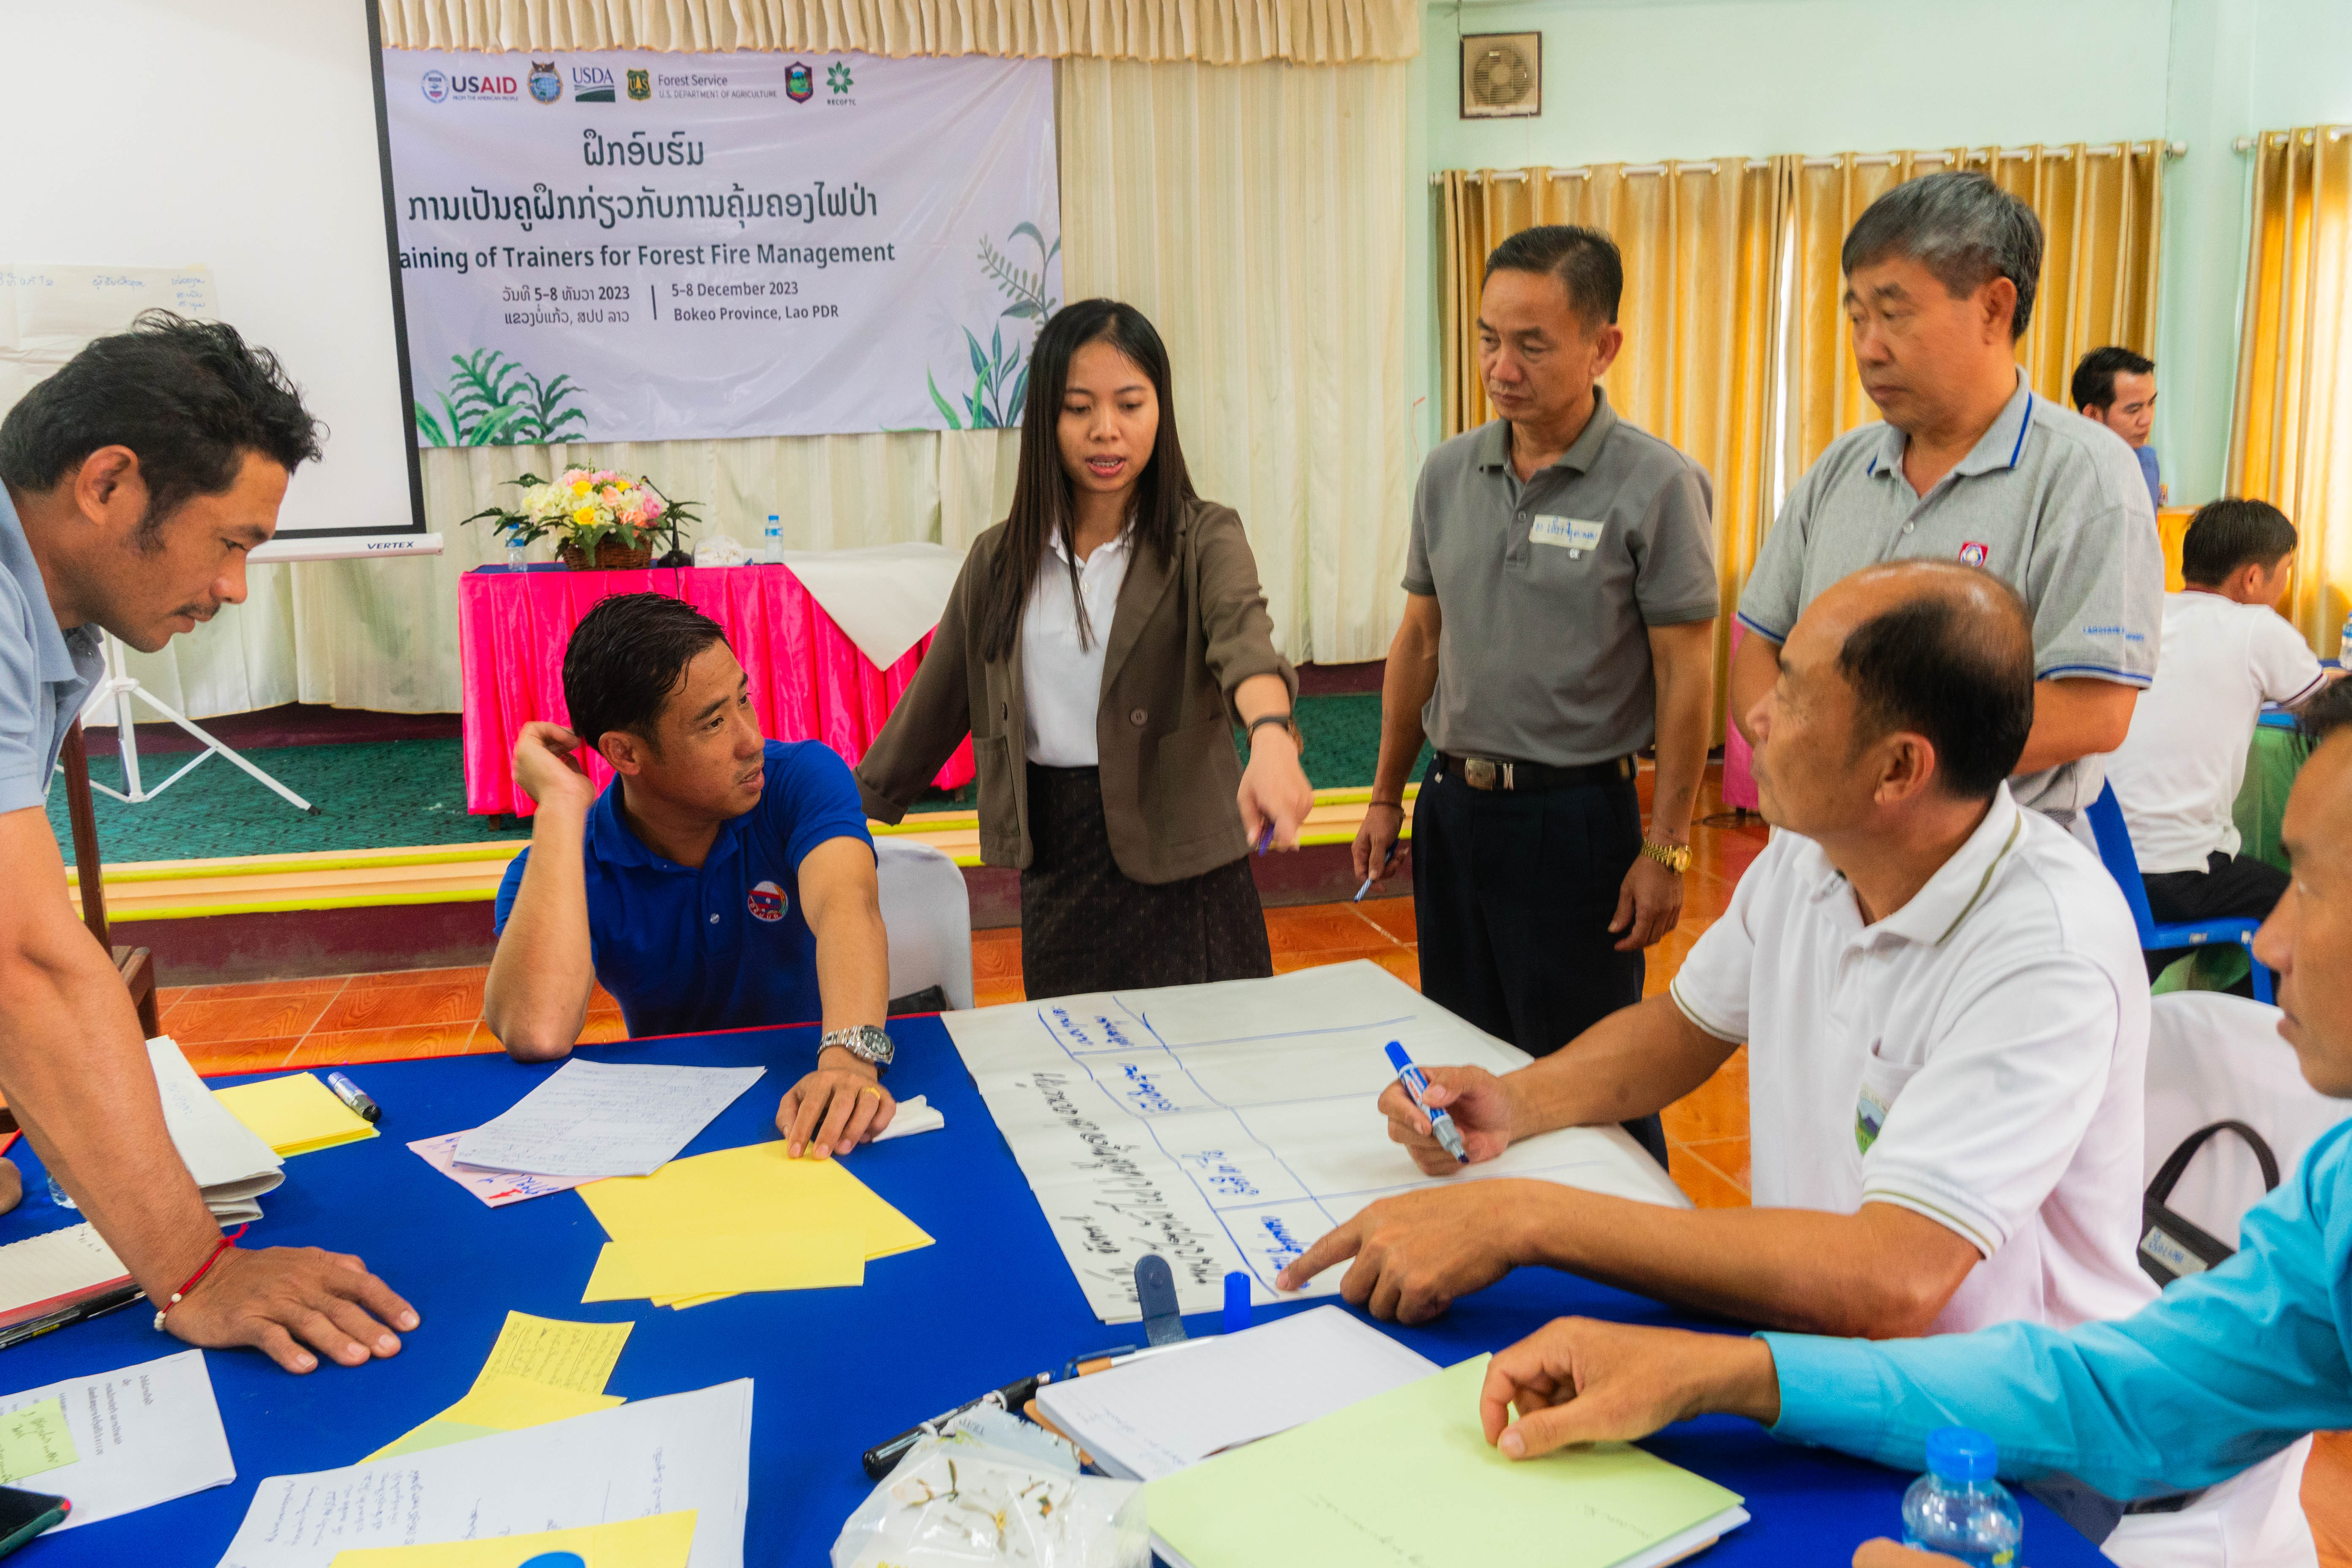 RECOFTC Lao PDR’s project assistant Noukone Duangoudom, guides participants in the group assignment. Divided into groups, participants assessed and charted out forest fire risks, current forest fire management plans, and control measures.